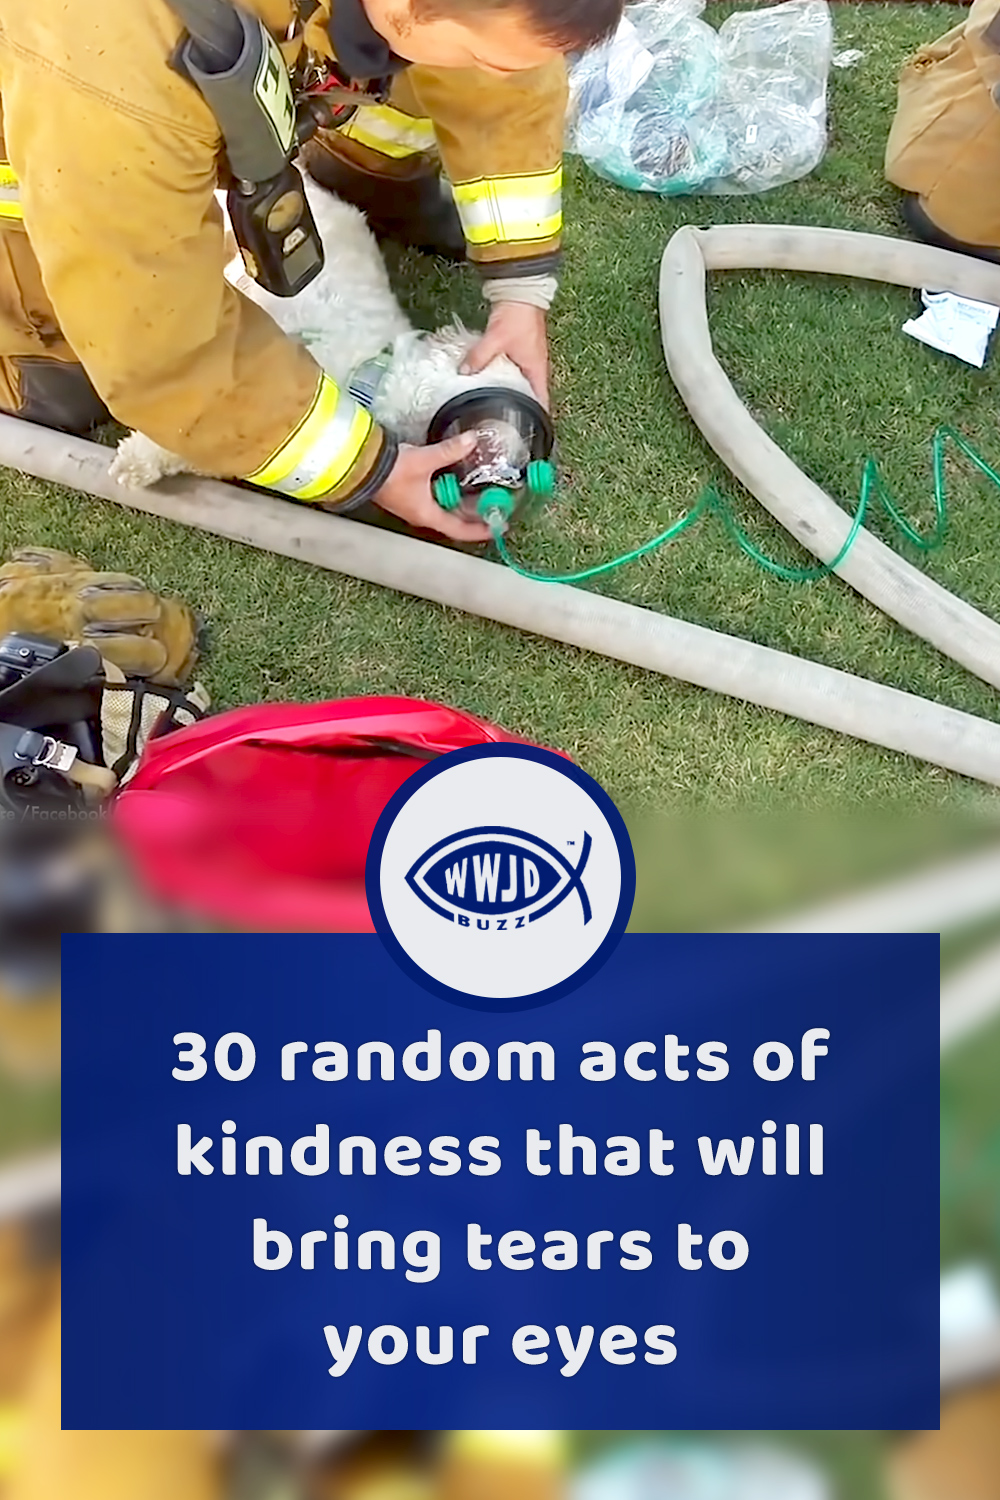 30 random acts of kindness that will bring tears to your eyes